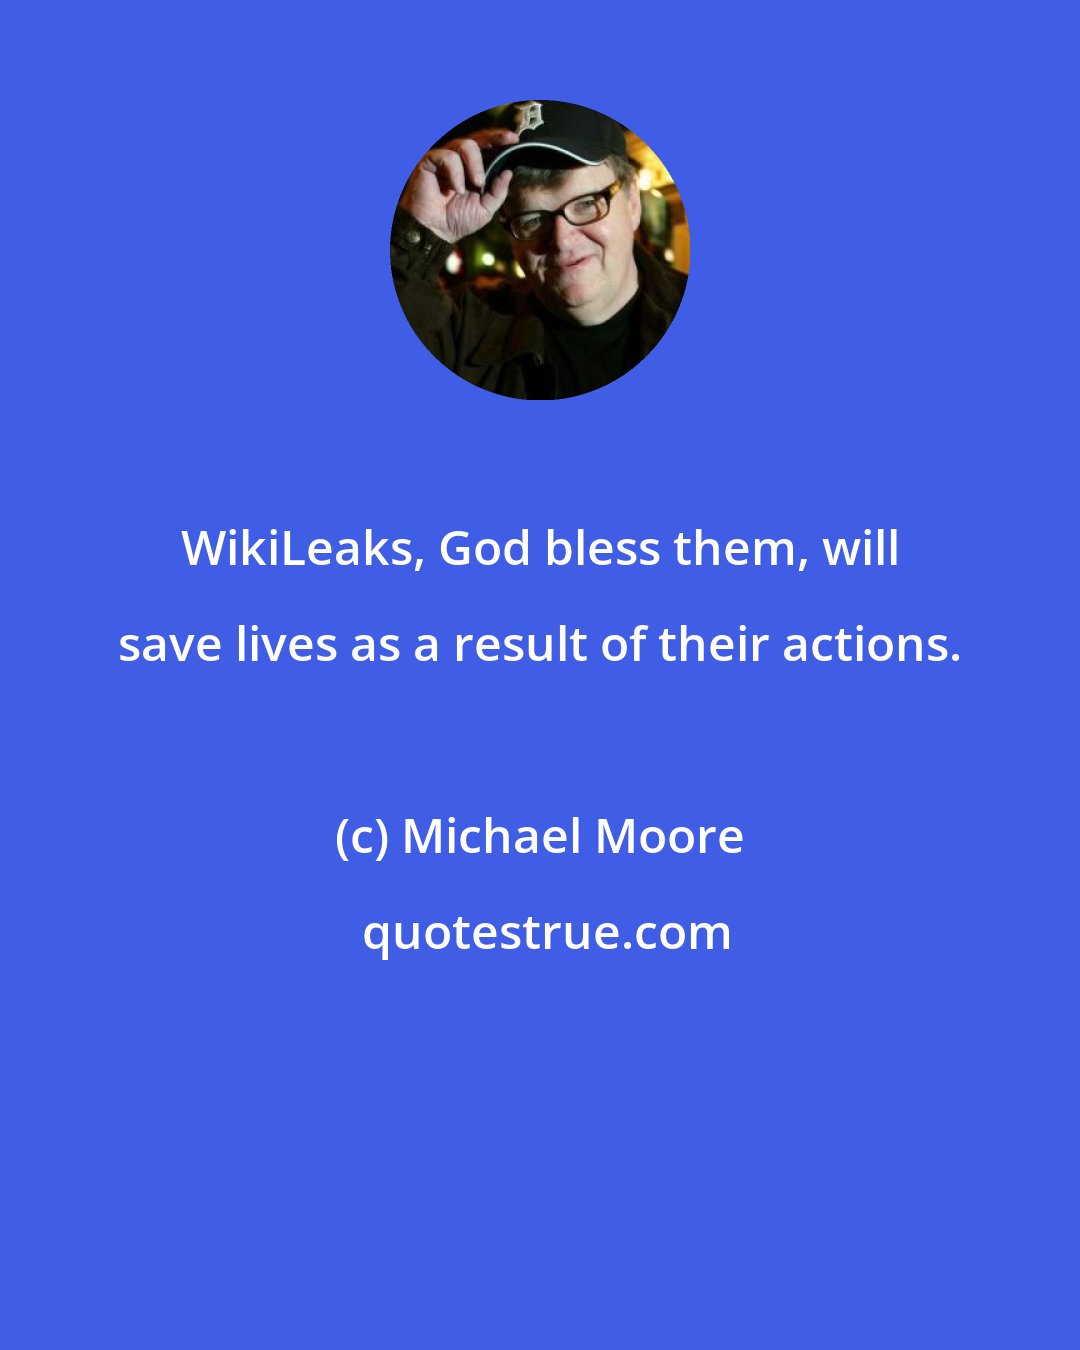 Michael Moore: WikiLeaks, God bless them, will save lives as a result of their actions.